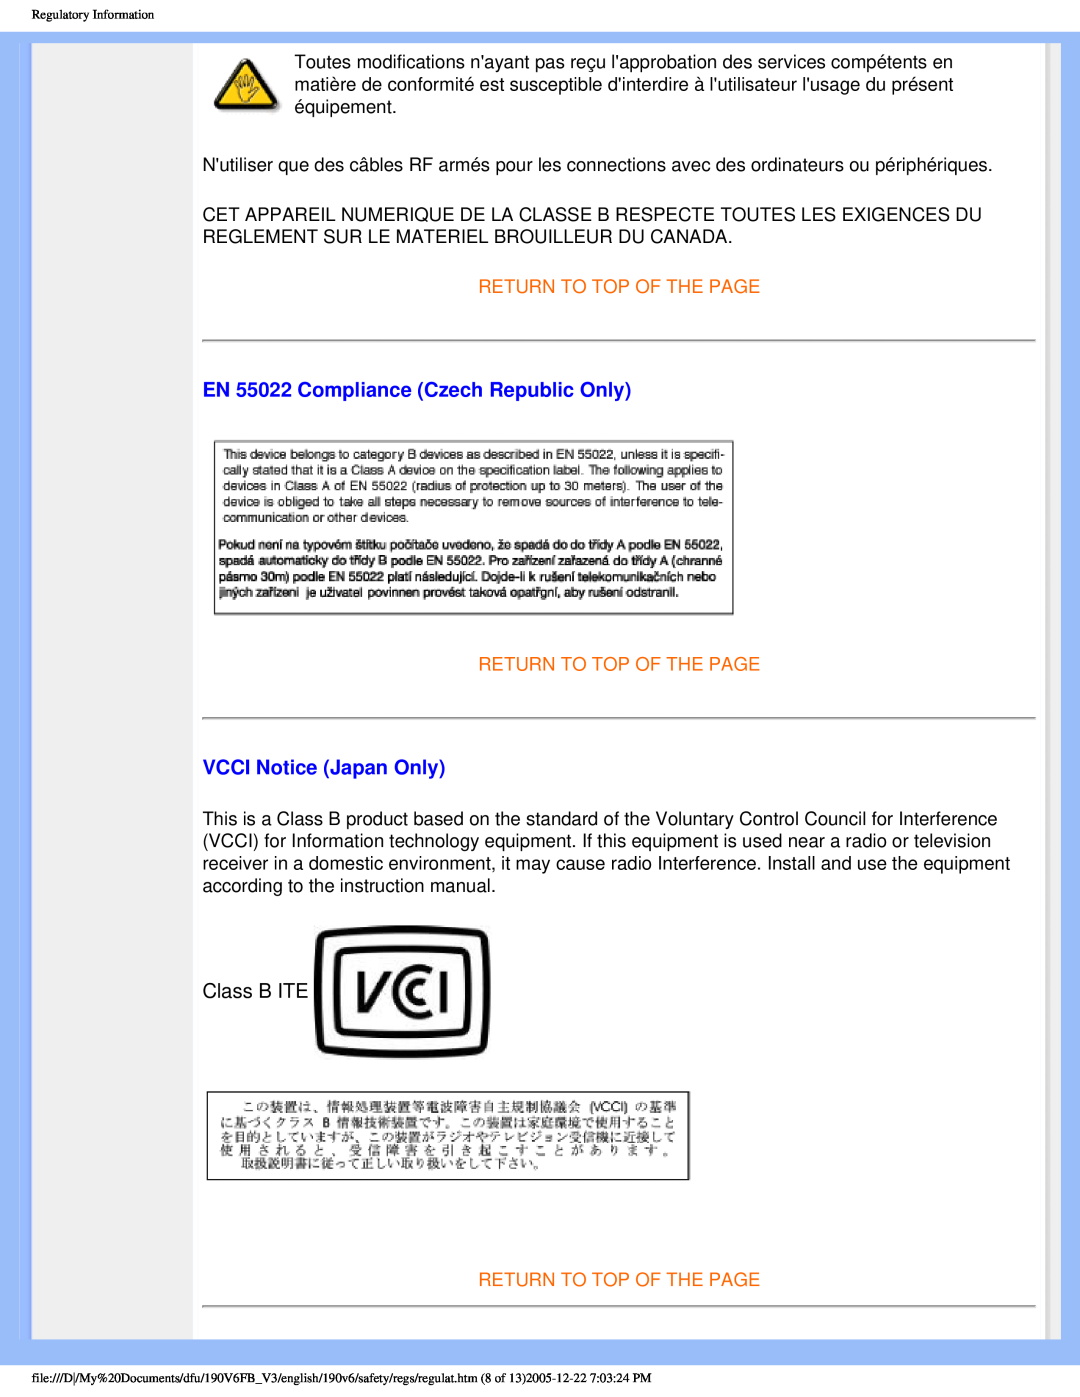 Philips 190V6FB user manual EN 55022 Compliance Czech Republic Only, VCCI Notice Japan Only, Return To Top Of The Page 